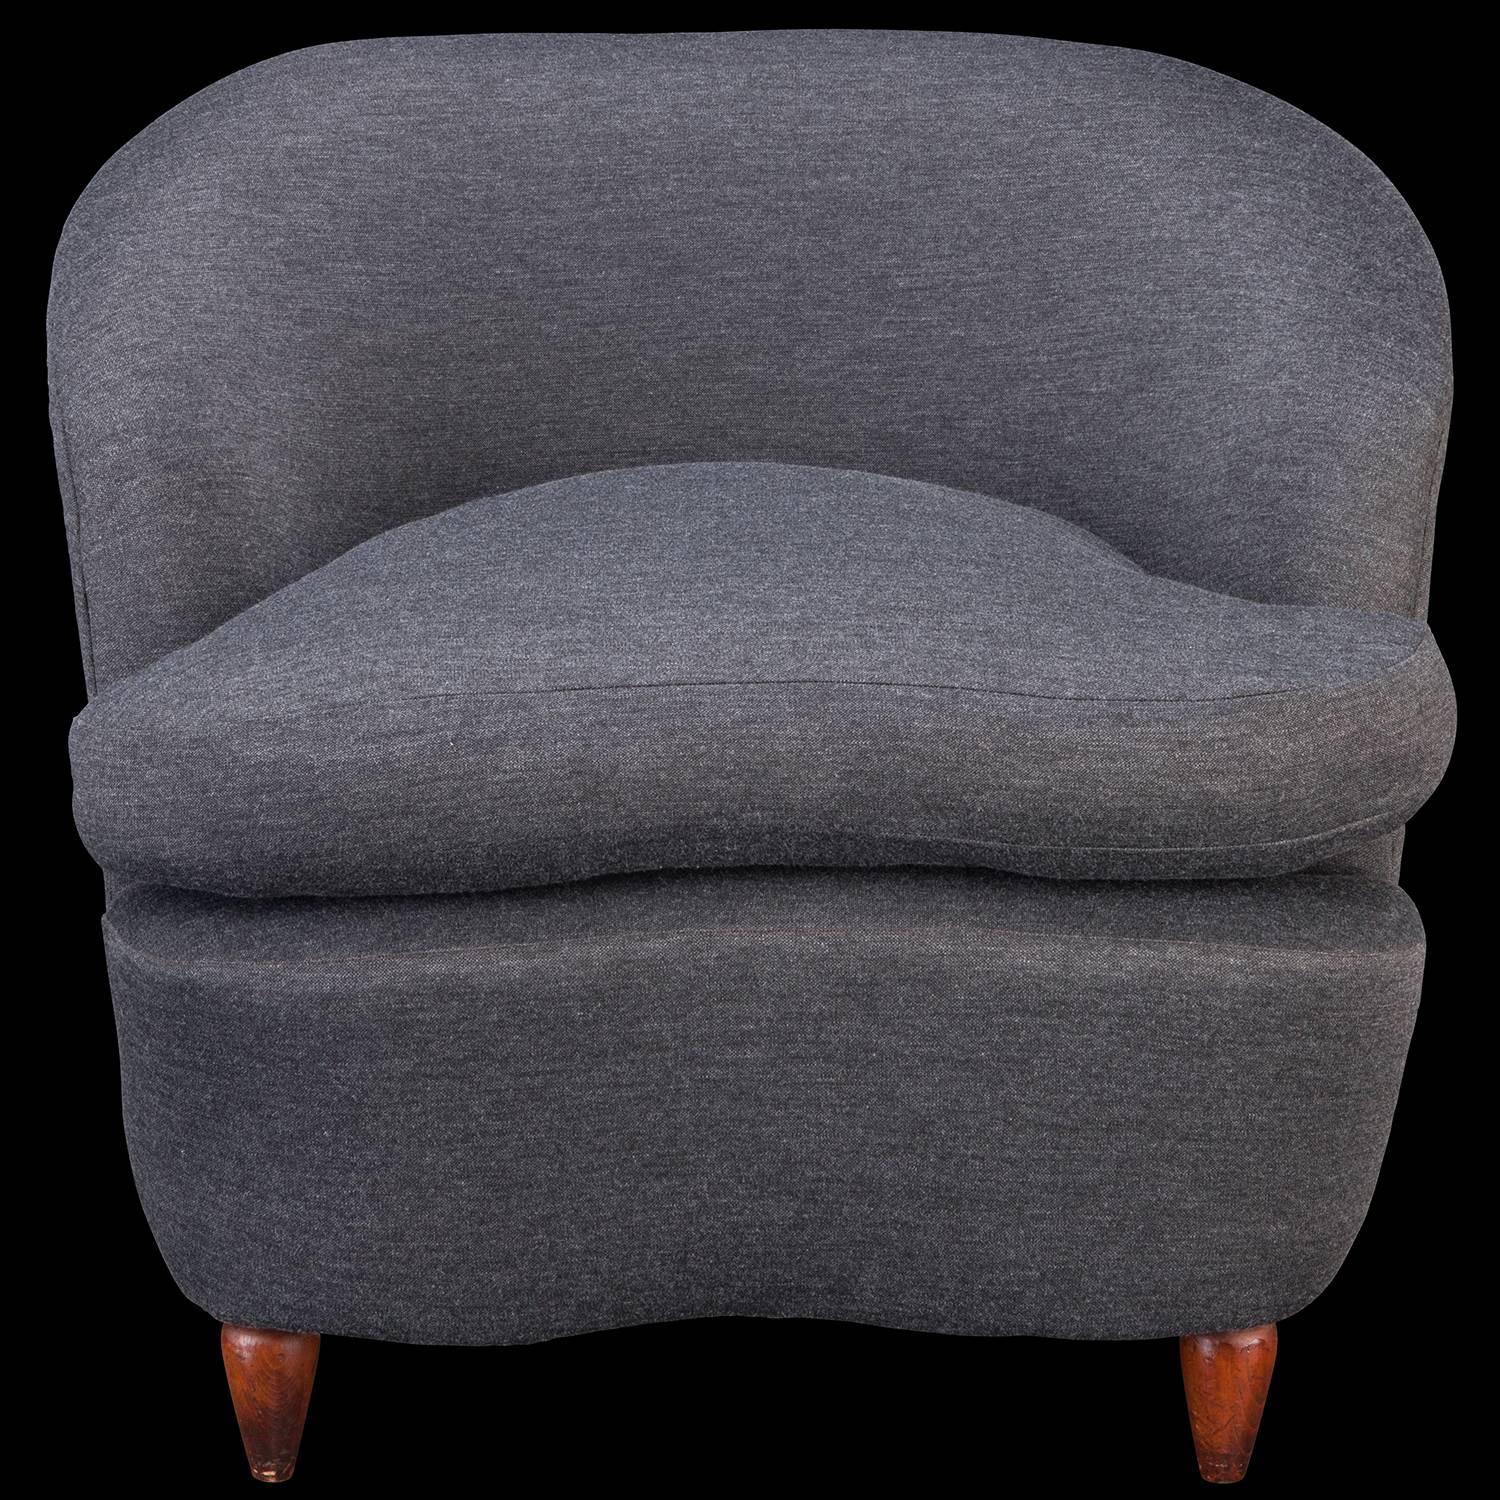 Newly upholstered in grey Romo fabric, with turned legs and feather seat cushions.